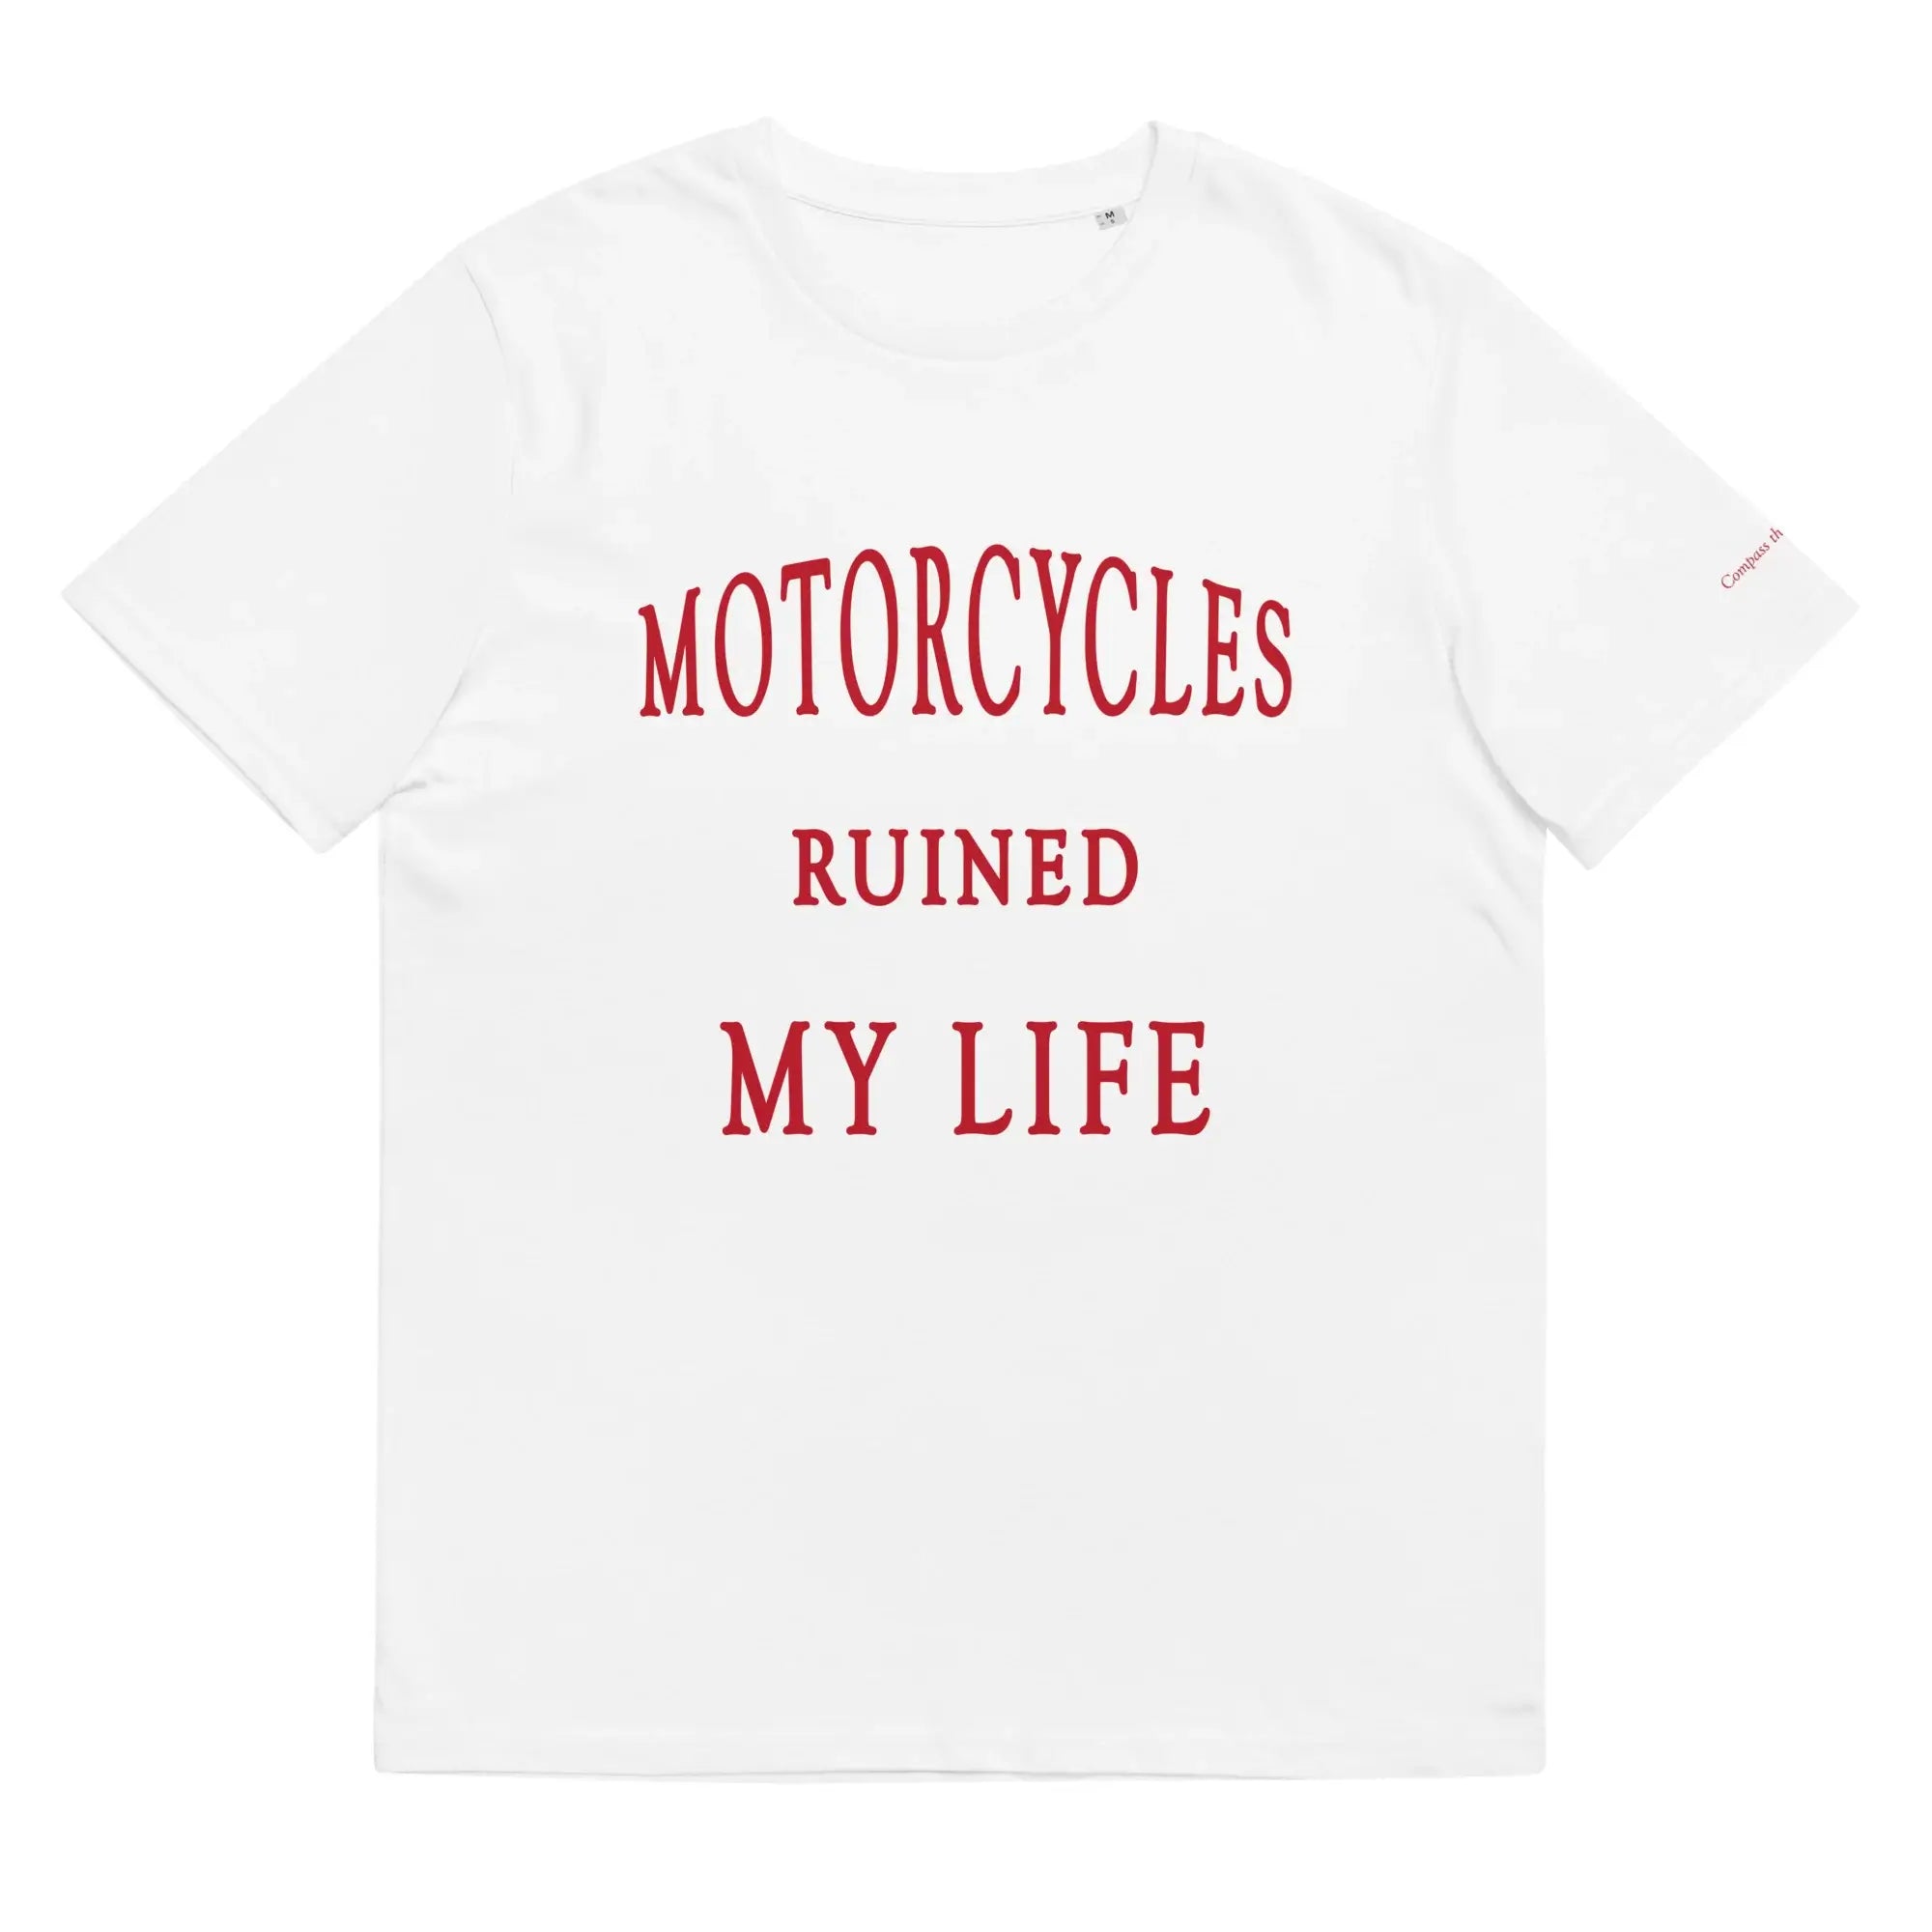 Motorcycles Ruined My Life {White Organic Cotton T-shirt}